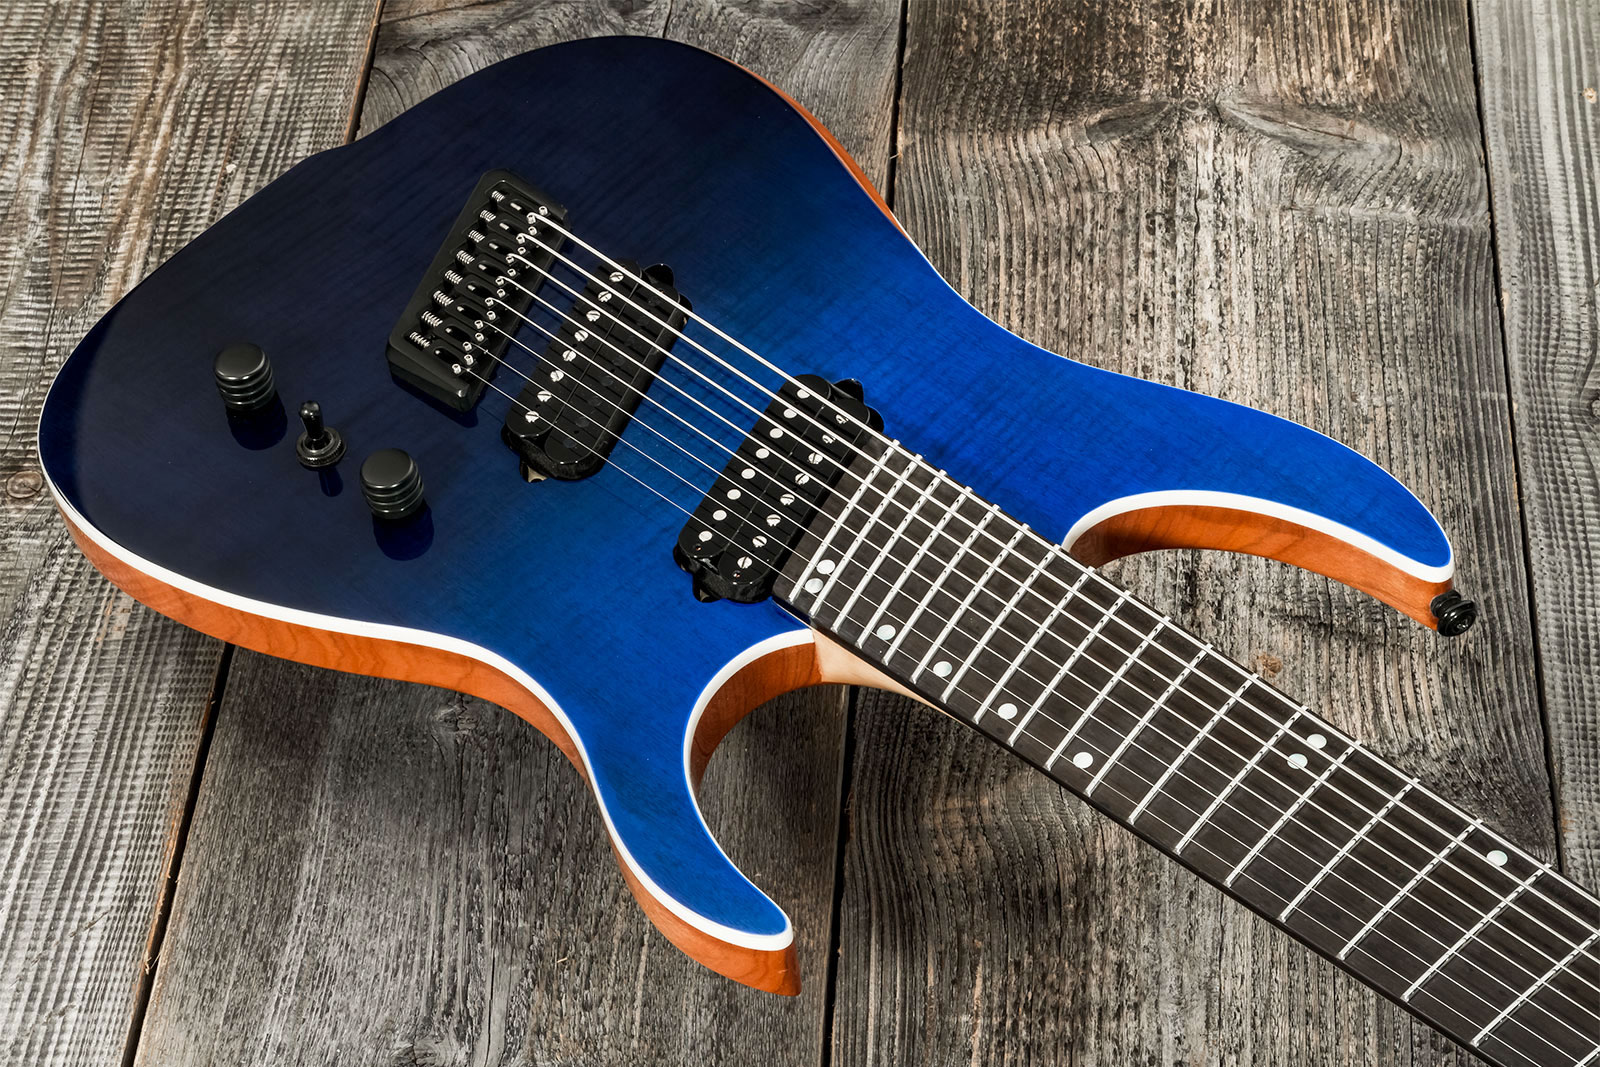 Ormsby Hype Gtr 8 Ltd Run 16 8c Multiscale 2h Ht Eb #gtr07665 - Sky Fall - 8 and 9 string electric guitar - Variation 2